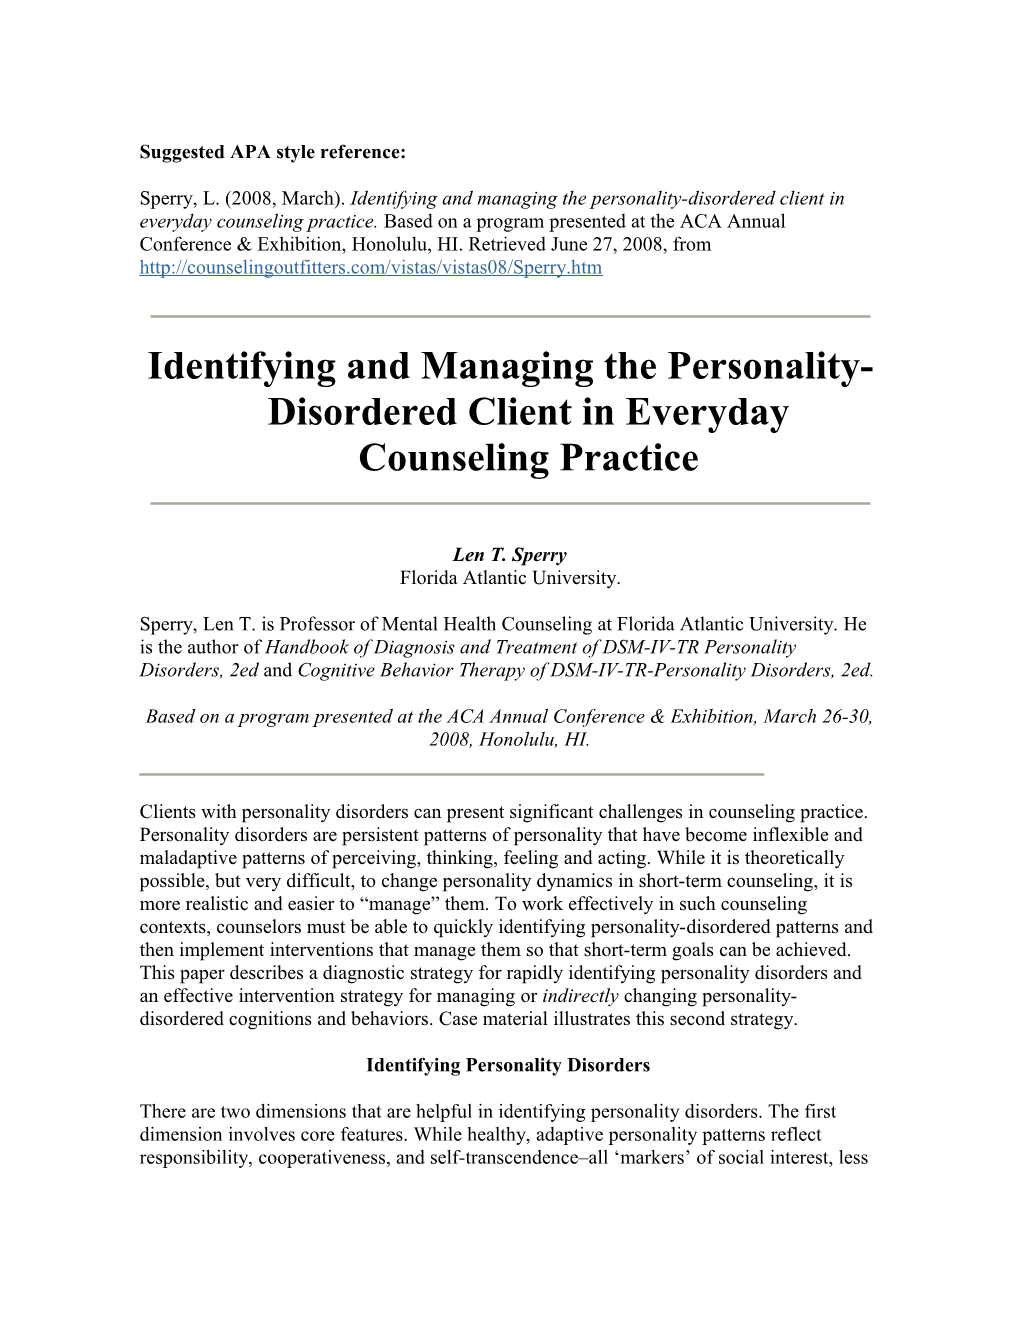 Identifying and Managing the Personality-Disordered Client in Everyday Counseling Practice